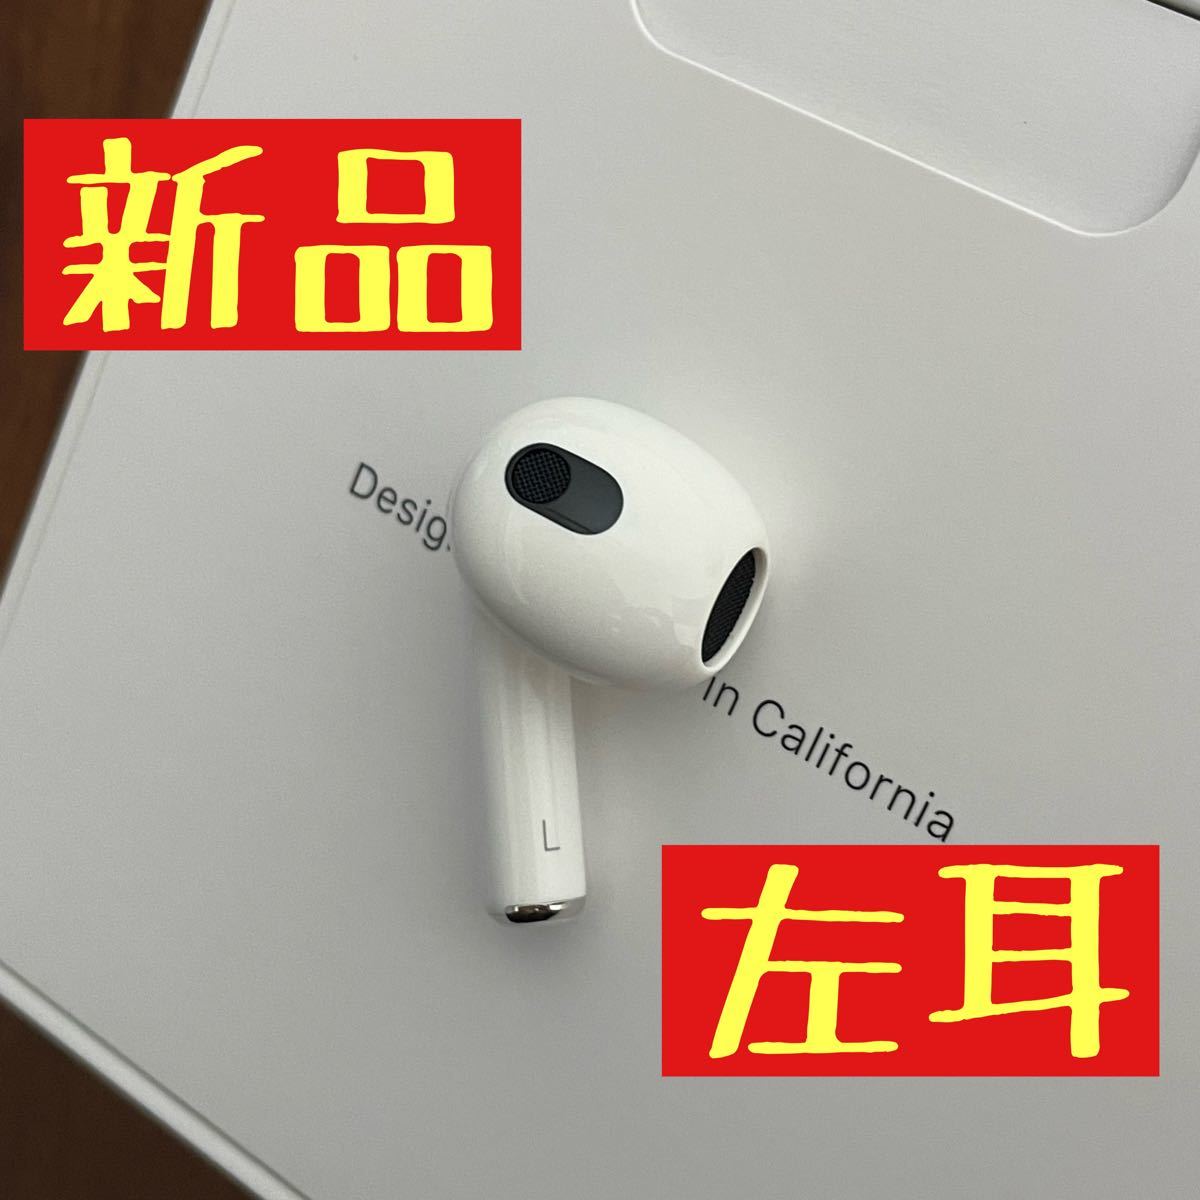 AirPods 第3世代 左耳のみ 国内正規品 MME73J/A 片耳 L